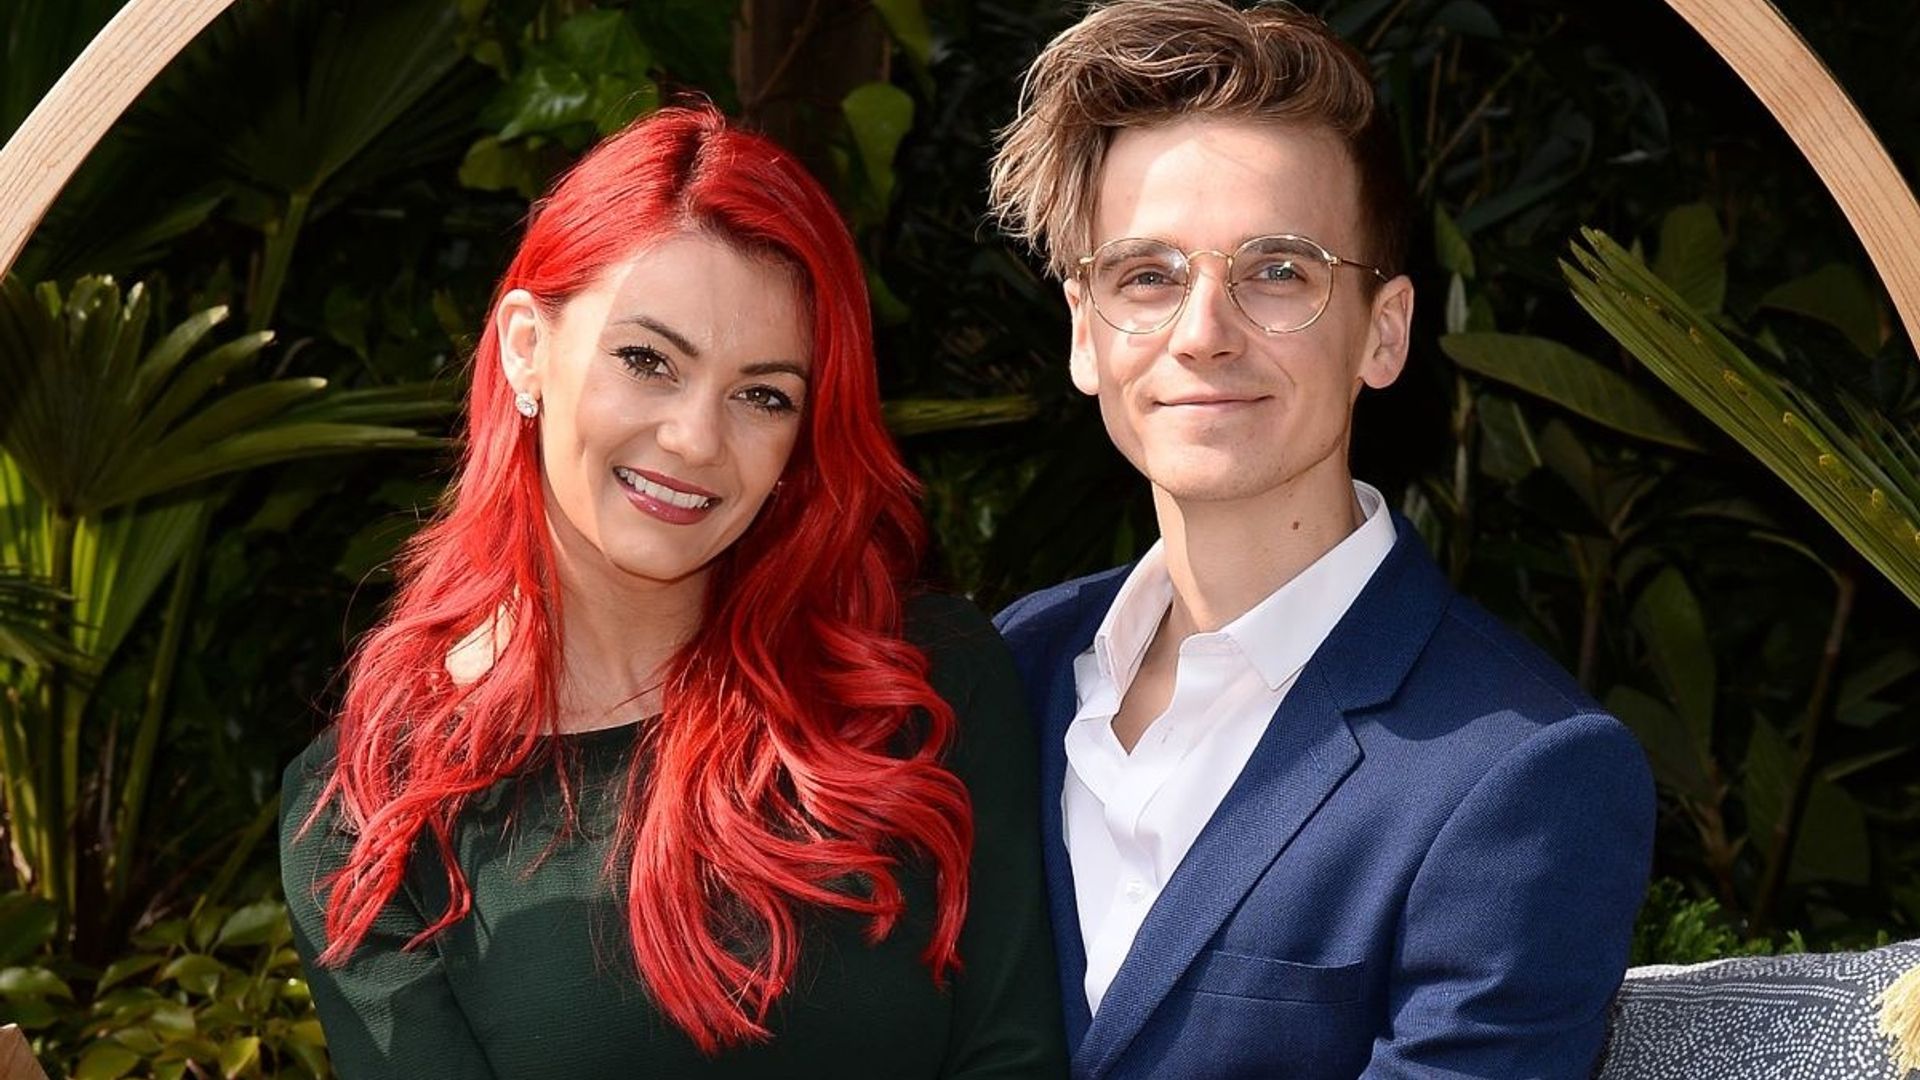 Dianne Buswell melts hearts with wedding photo